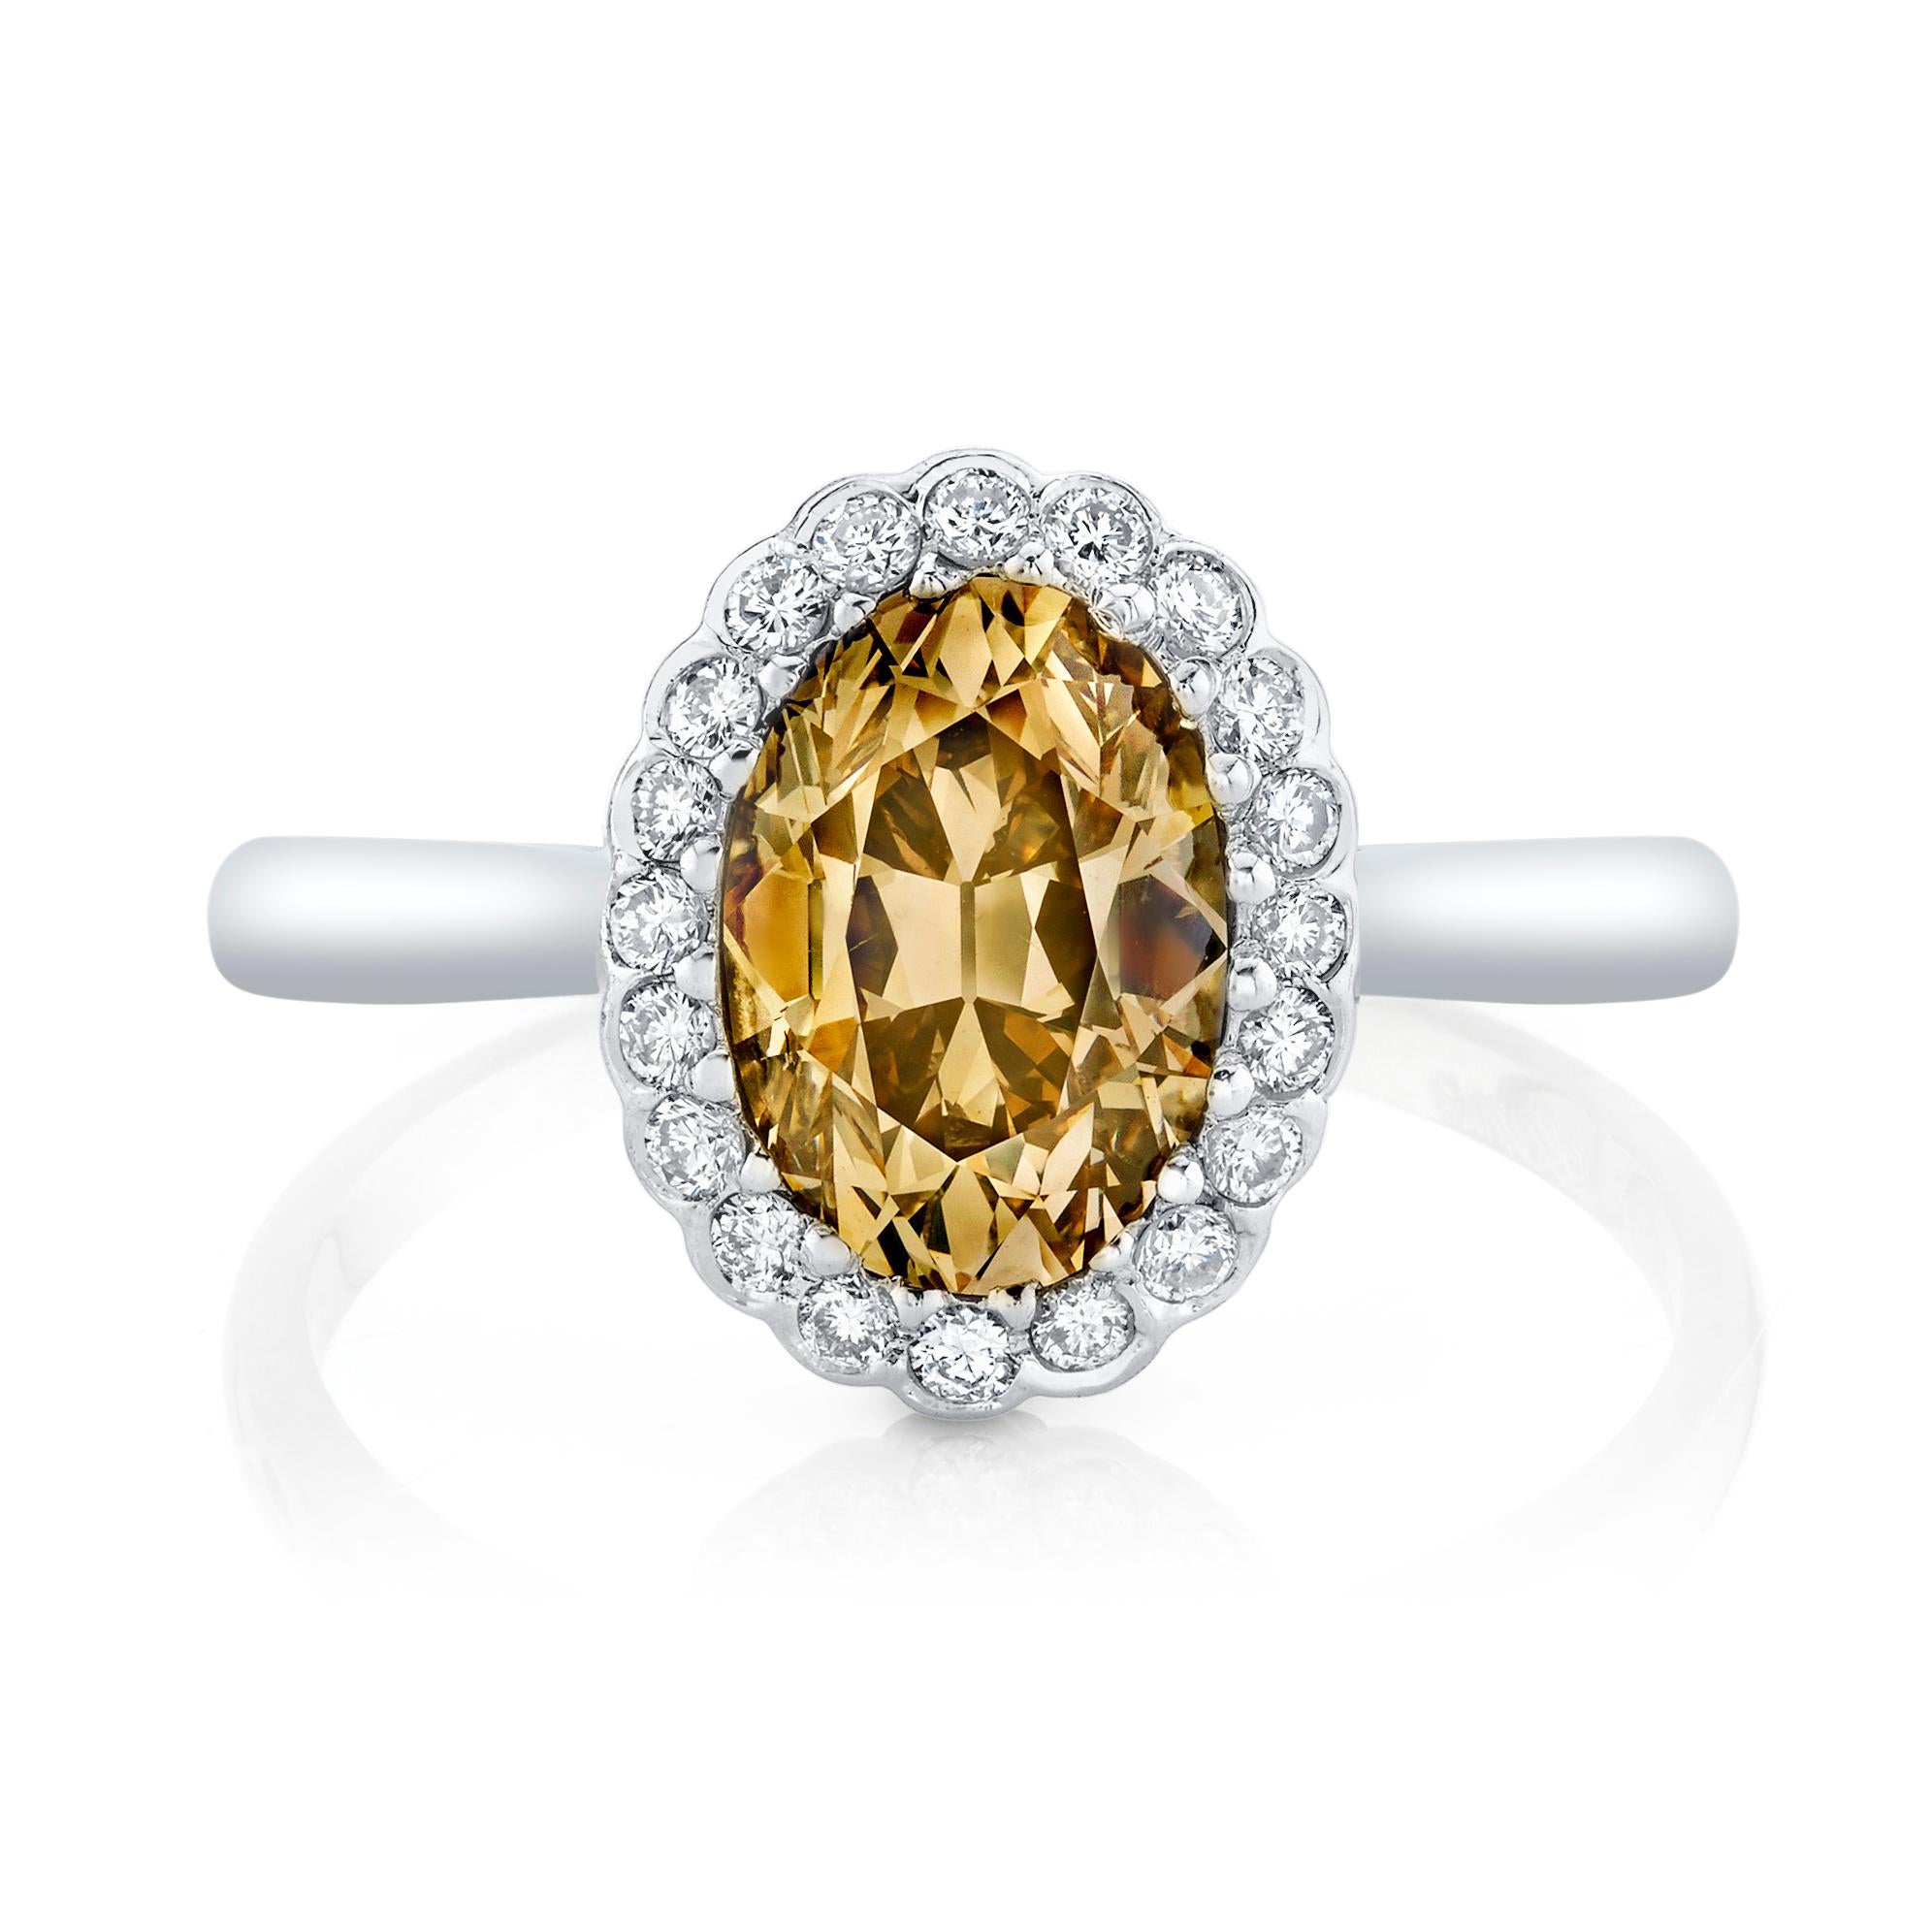 This lovely oval brilliant-cut diamond weighs 1.54 cts., displaying the warm glow of a Natural Fancy Brownish Yellowish Orange color, an elegant border of twenty-two round-cut diamonds complete the ring.

Designed and signed Neil Lane